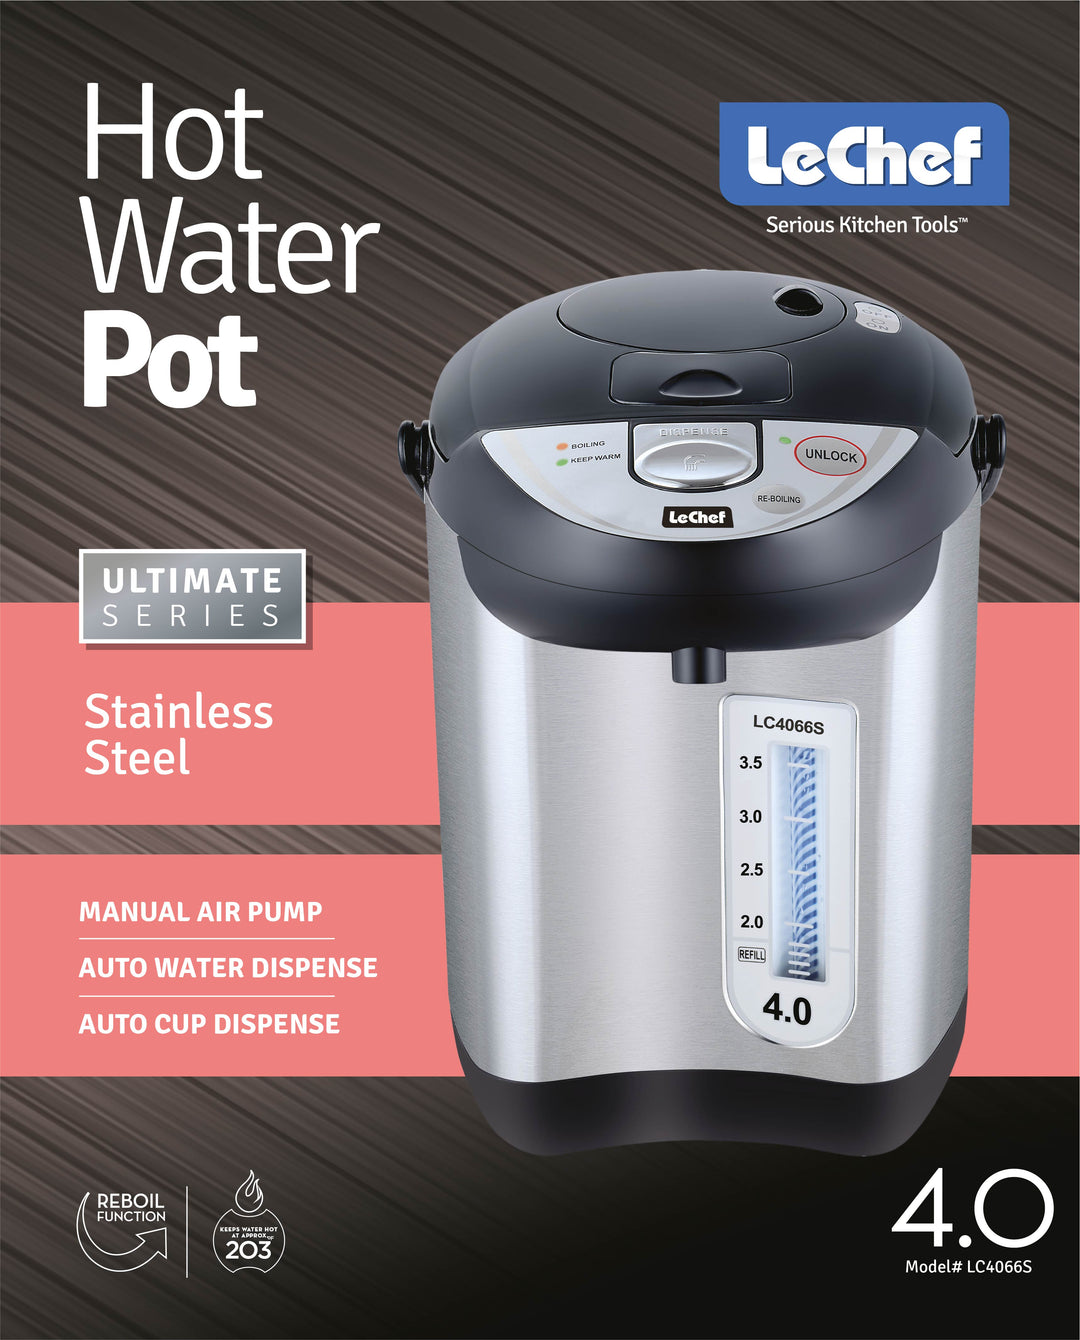 Foldable And Portable Teapot Water Heater Electric Kettle – Hyper Star